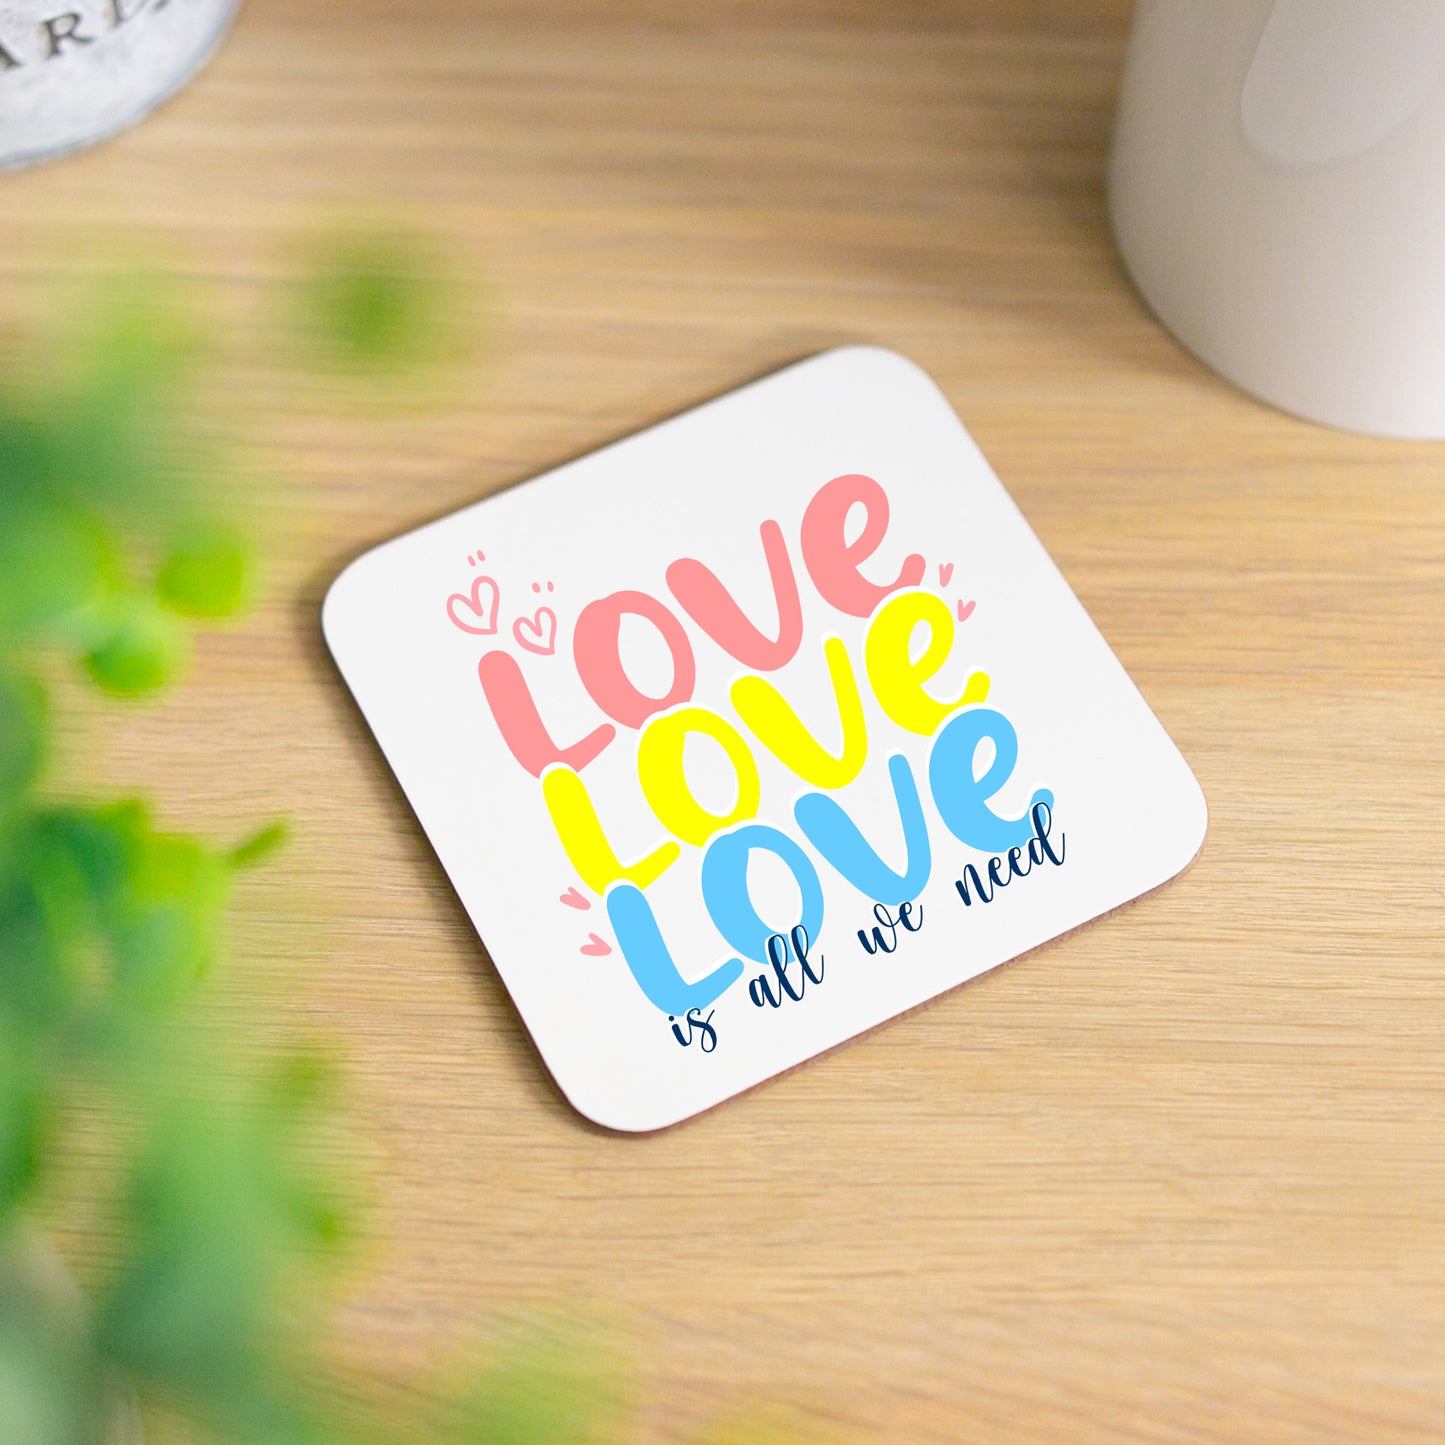 Love Is All We Need Mug and/or Coaster Gift  - Always Looking Good - Printed Coaster On Its Own  